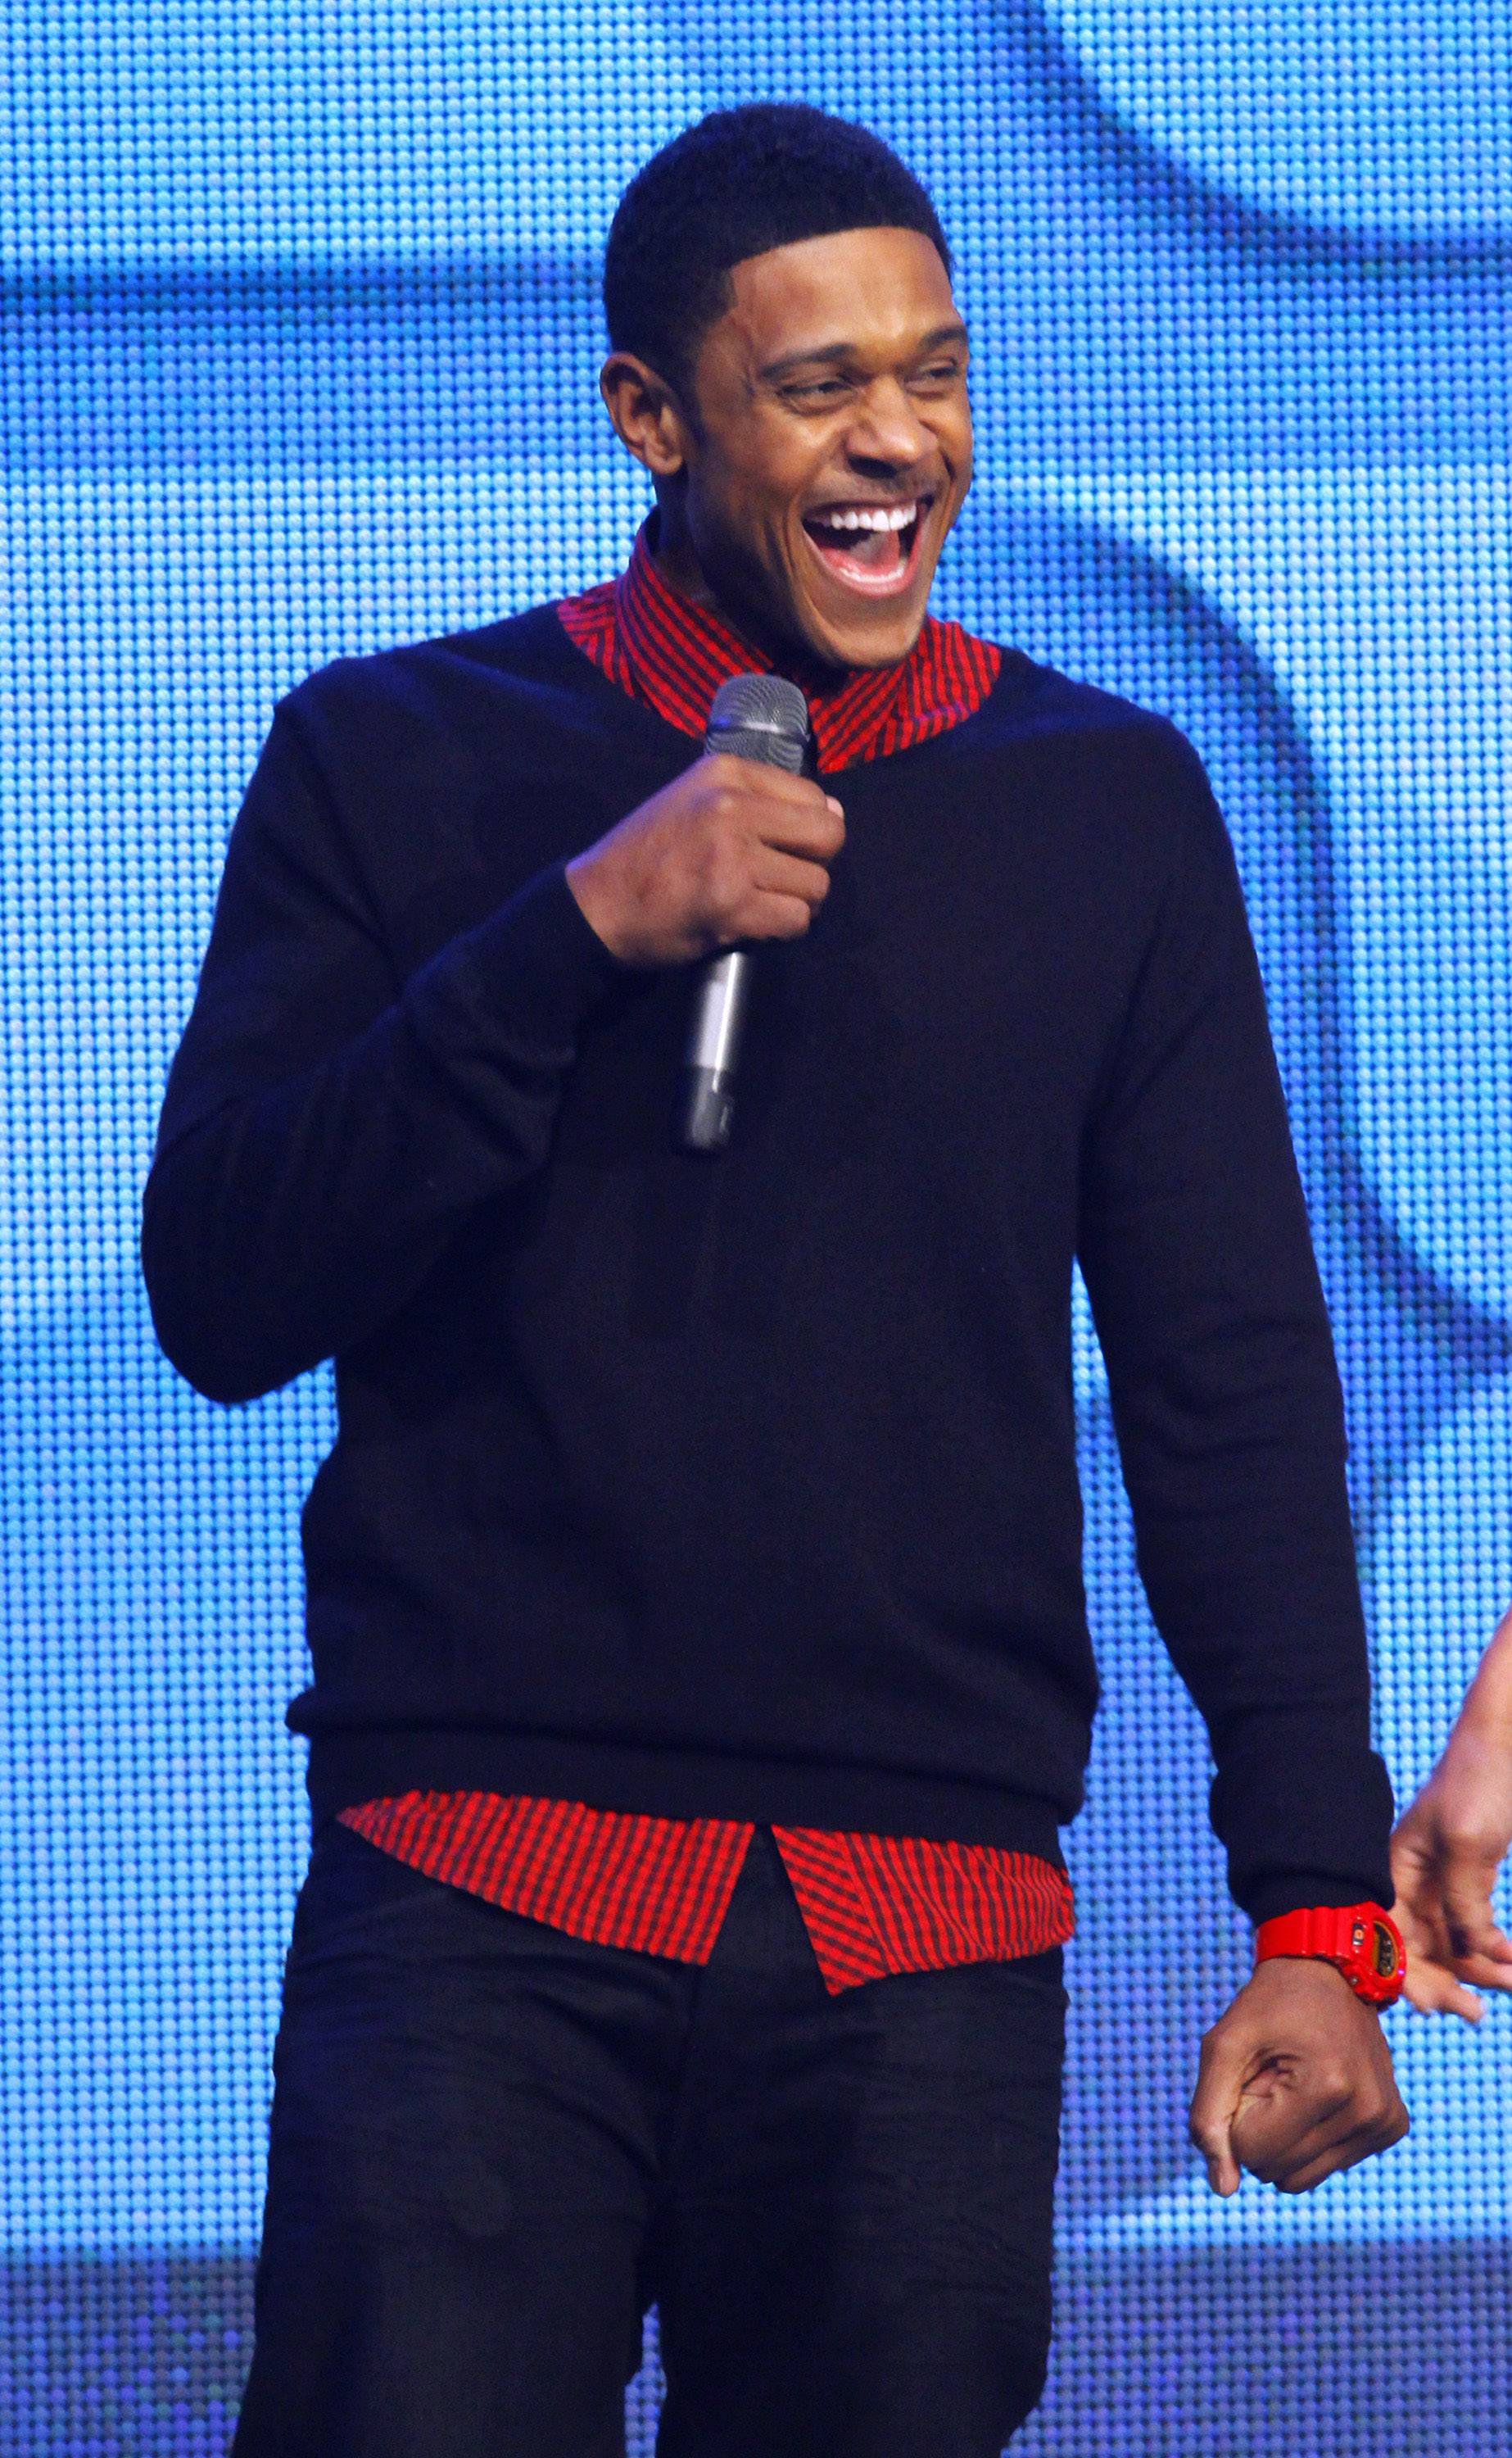 Pooch Hall - “I can’t speak for her. You have to be a strong person. But it’s one of those things that will put your relationship to the test. You have to handle it carefully and be mature about it.” —Pooch Hall on how his wife deals with his groupies&nbsp;(Photo credit: Donna Ward/Getty Images)